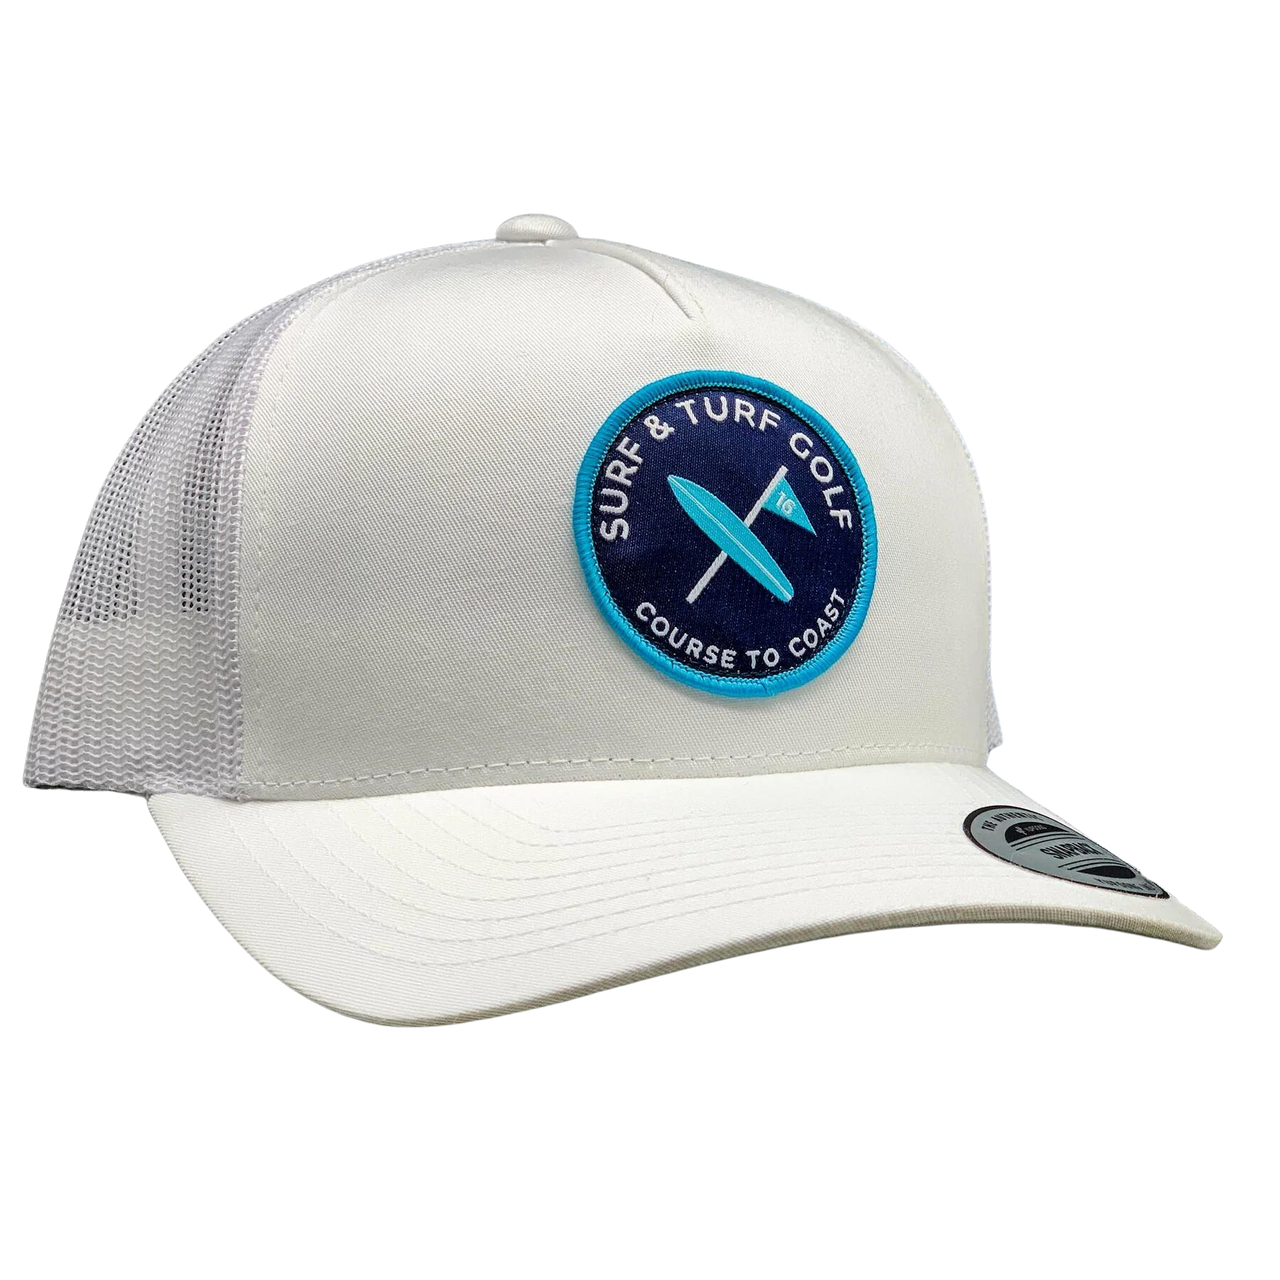 Surf & Turf Course to Coast 7 Hat